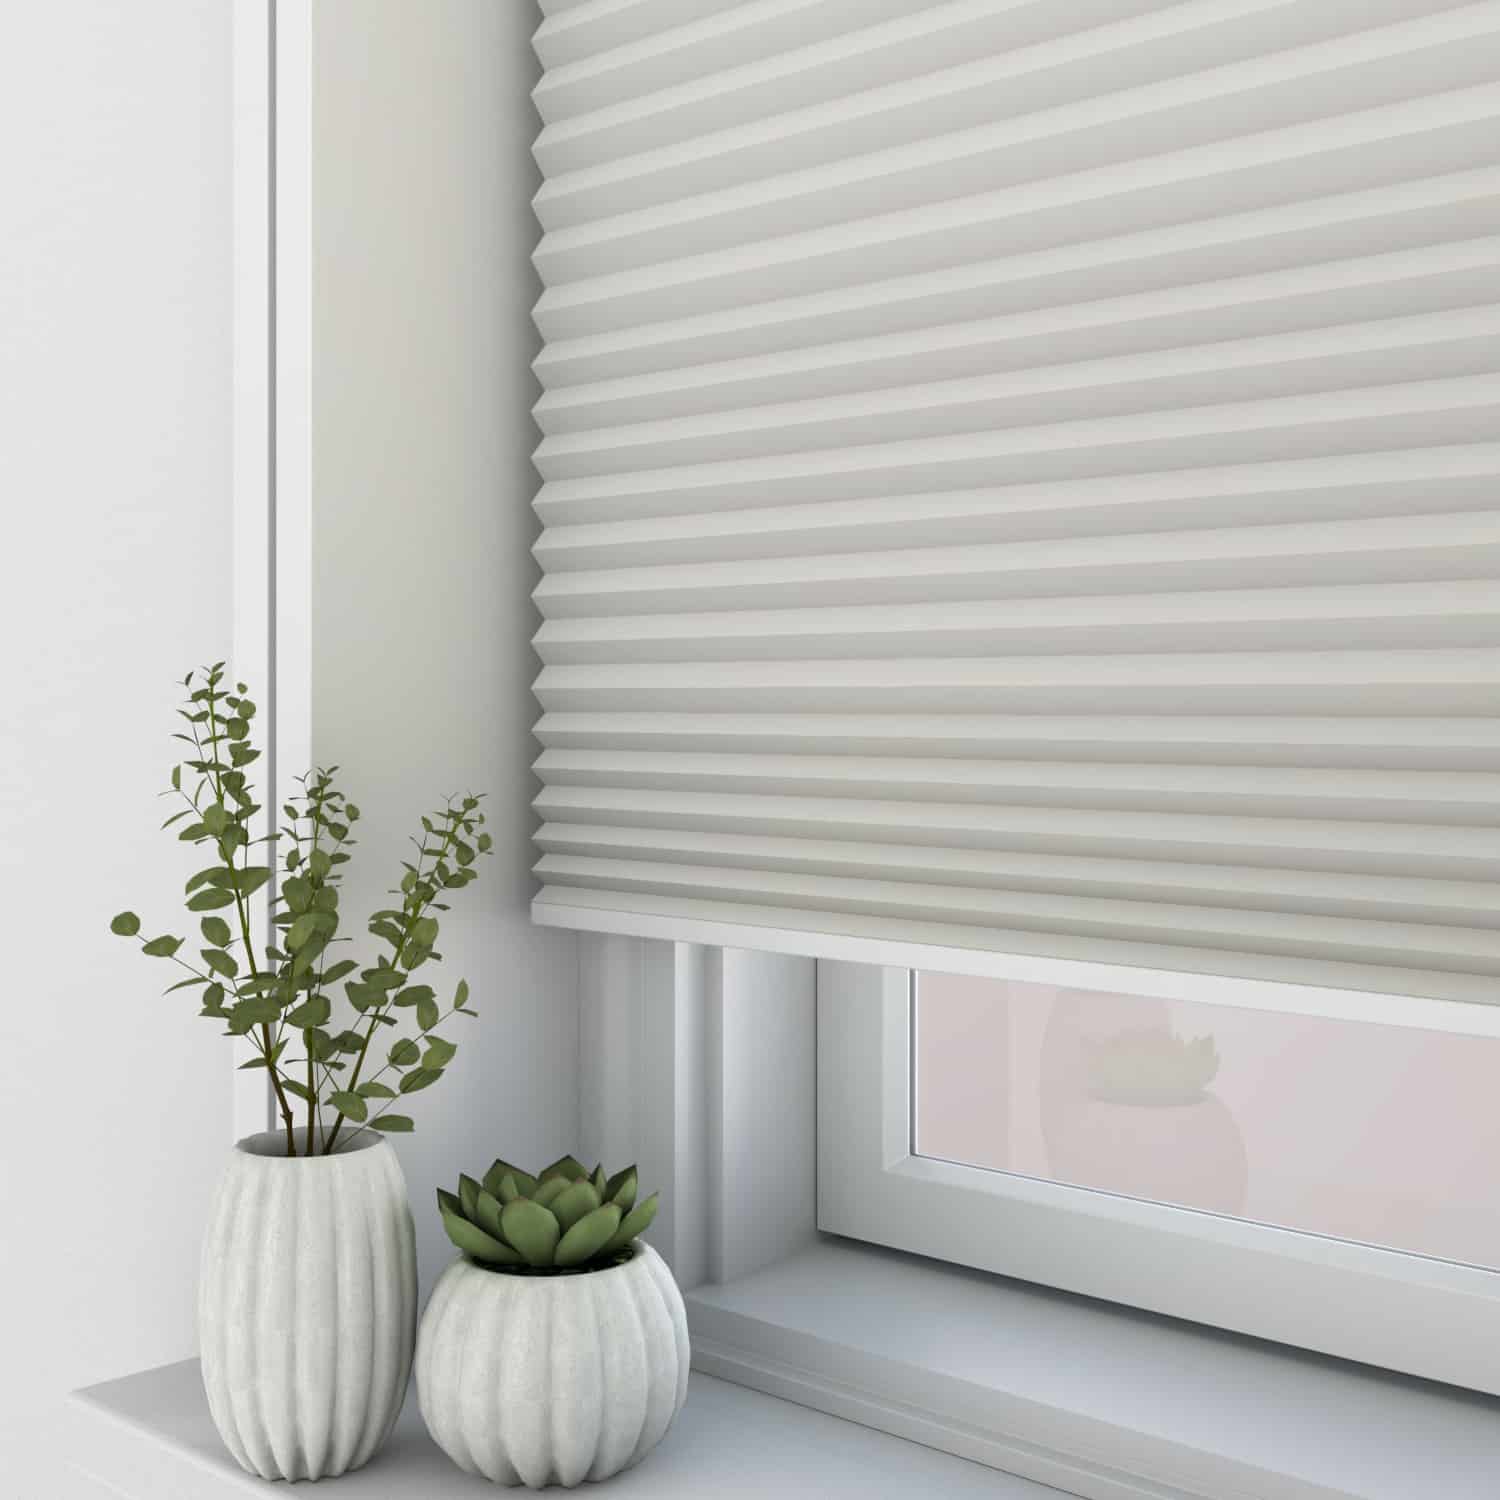 show original title Details about   Pleated Folding Blind Made to Measure ☆ Femi ☆ Profile Black ► plissees Blinds Blinds New! 